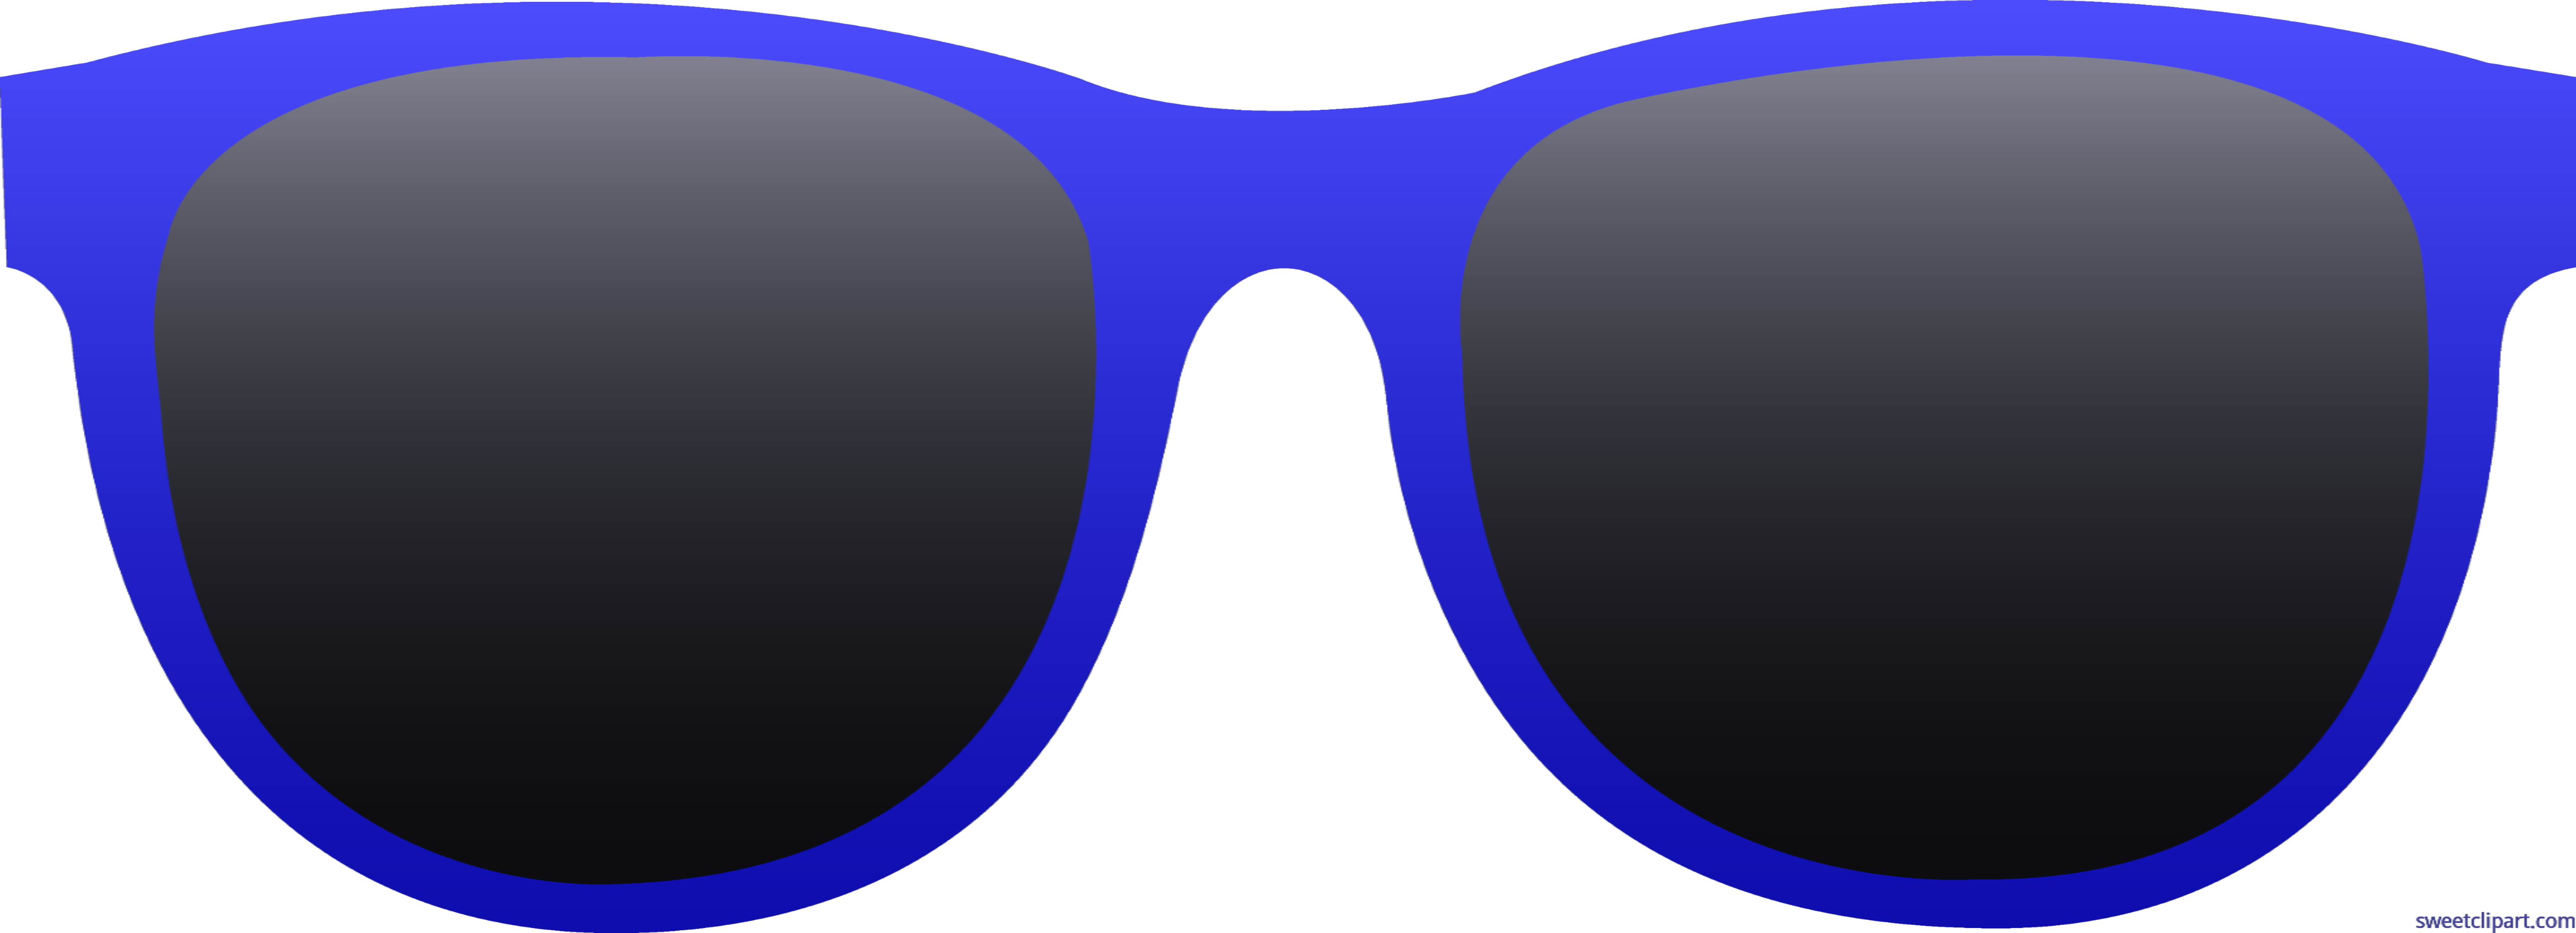 Goggles clipart sunglass. Sweet clip art page